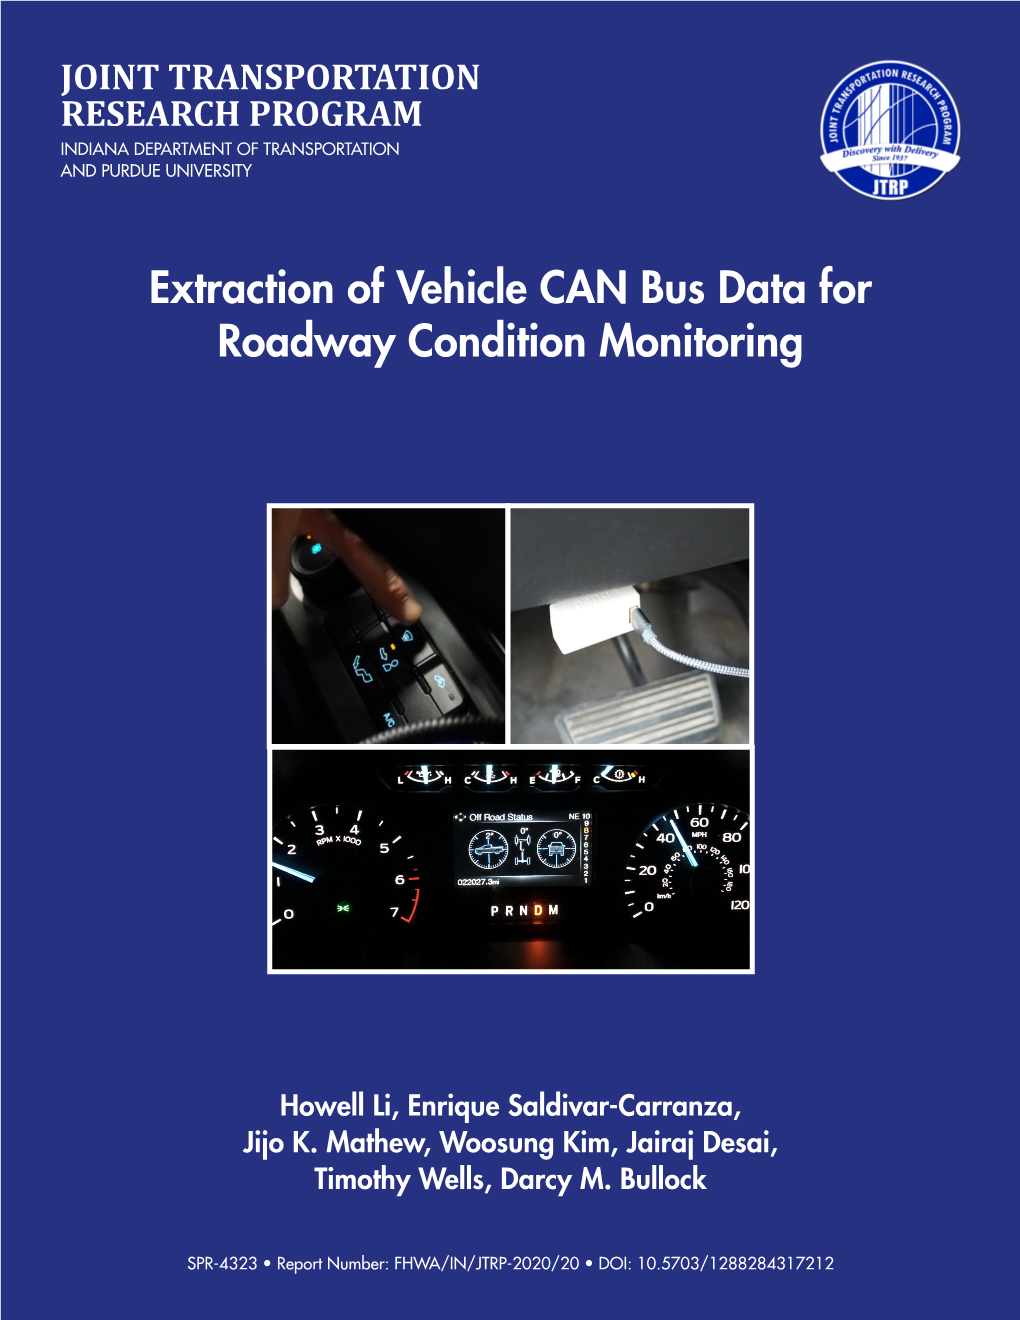 Extraction of Vehicle CAN Bus Data for Roadway Condition Monitoring